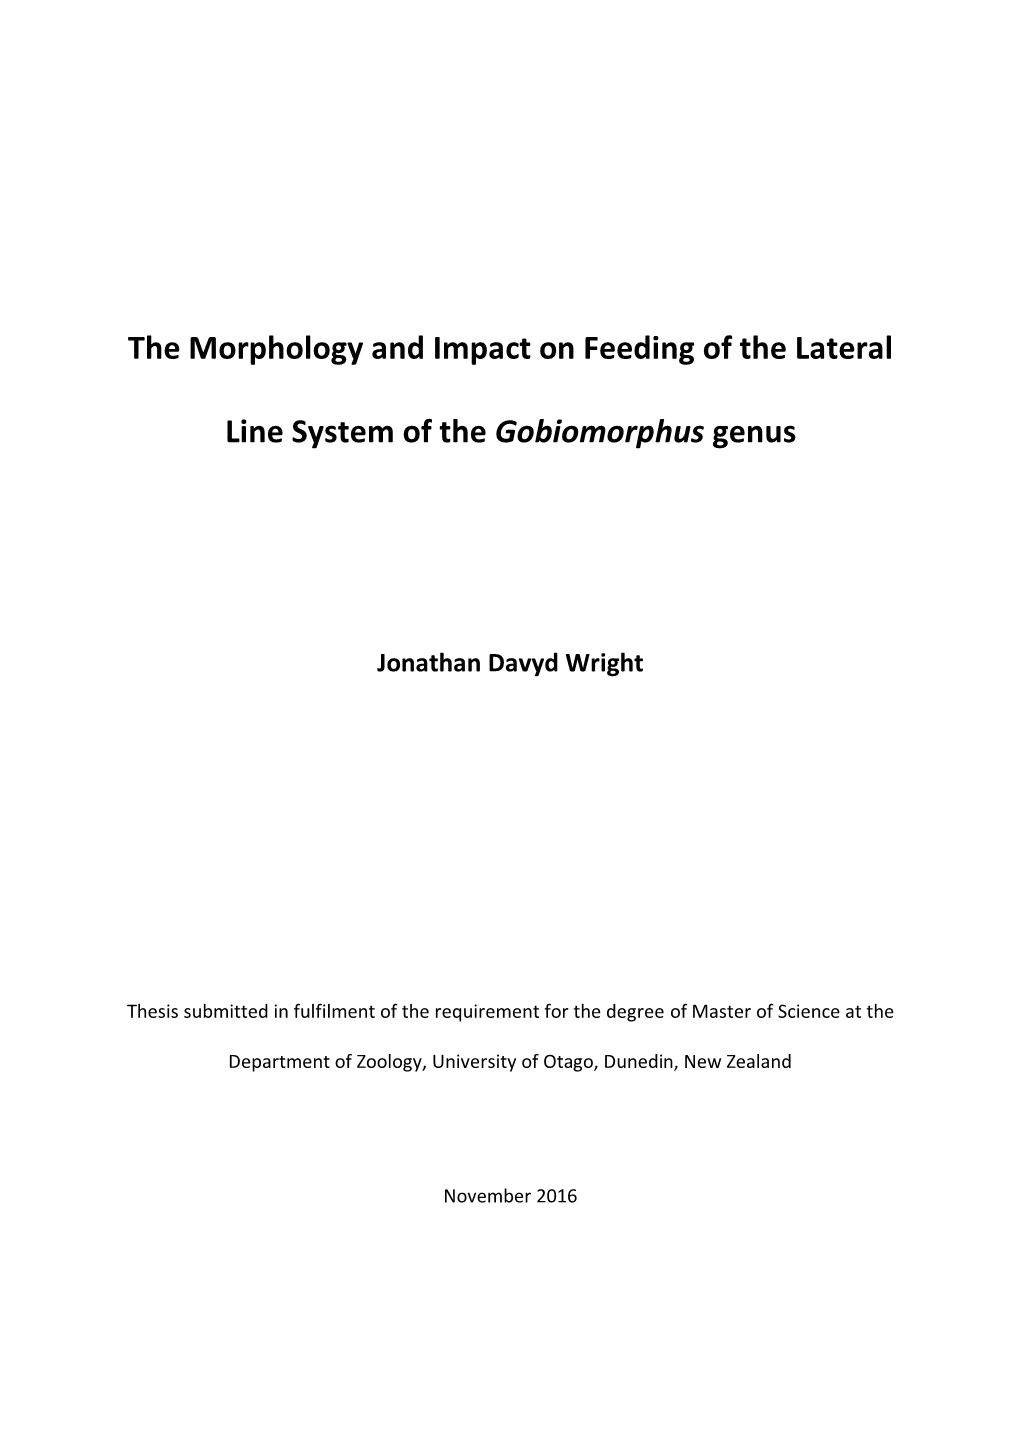 The Morphology and Impact on Feeding of the Lateral Line System